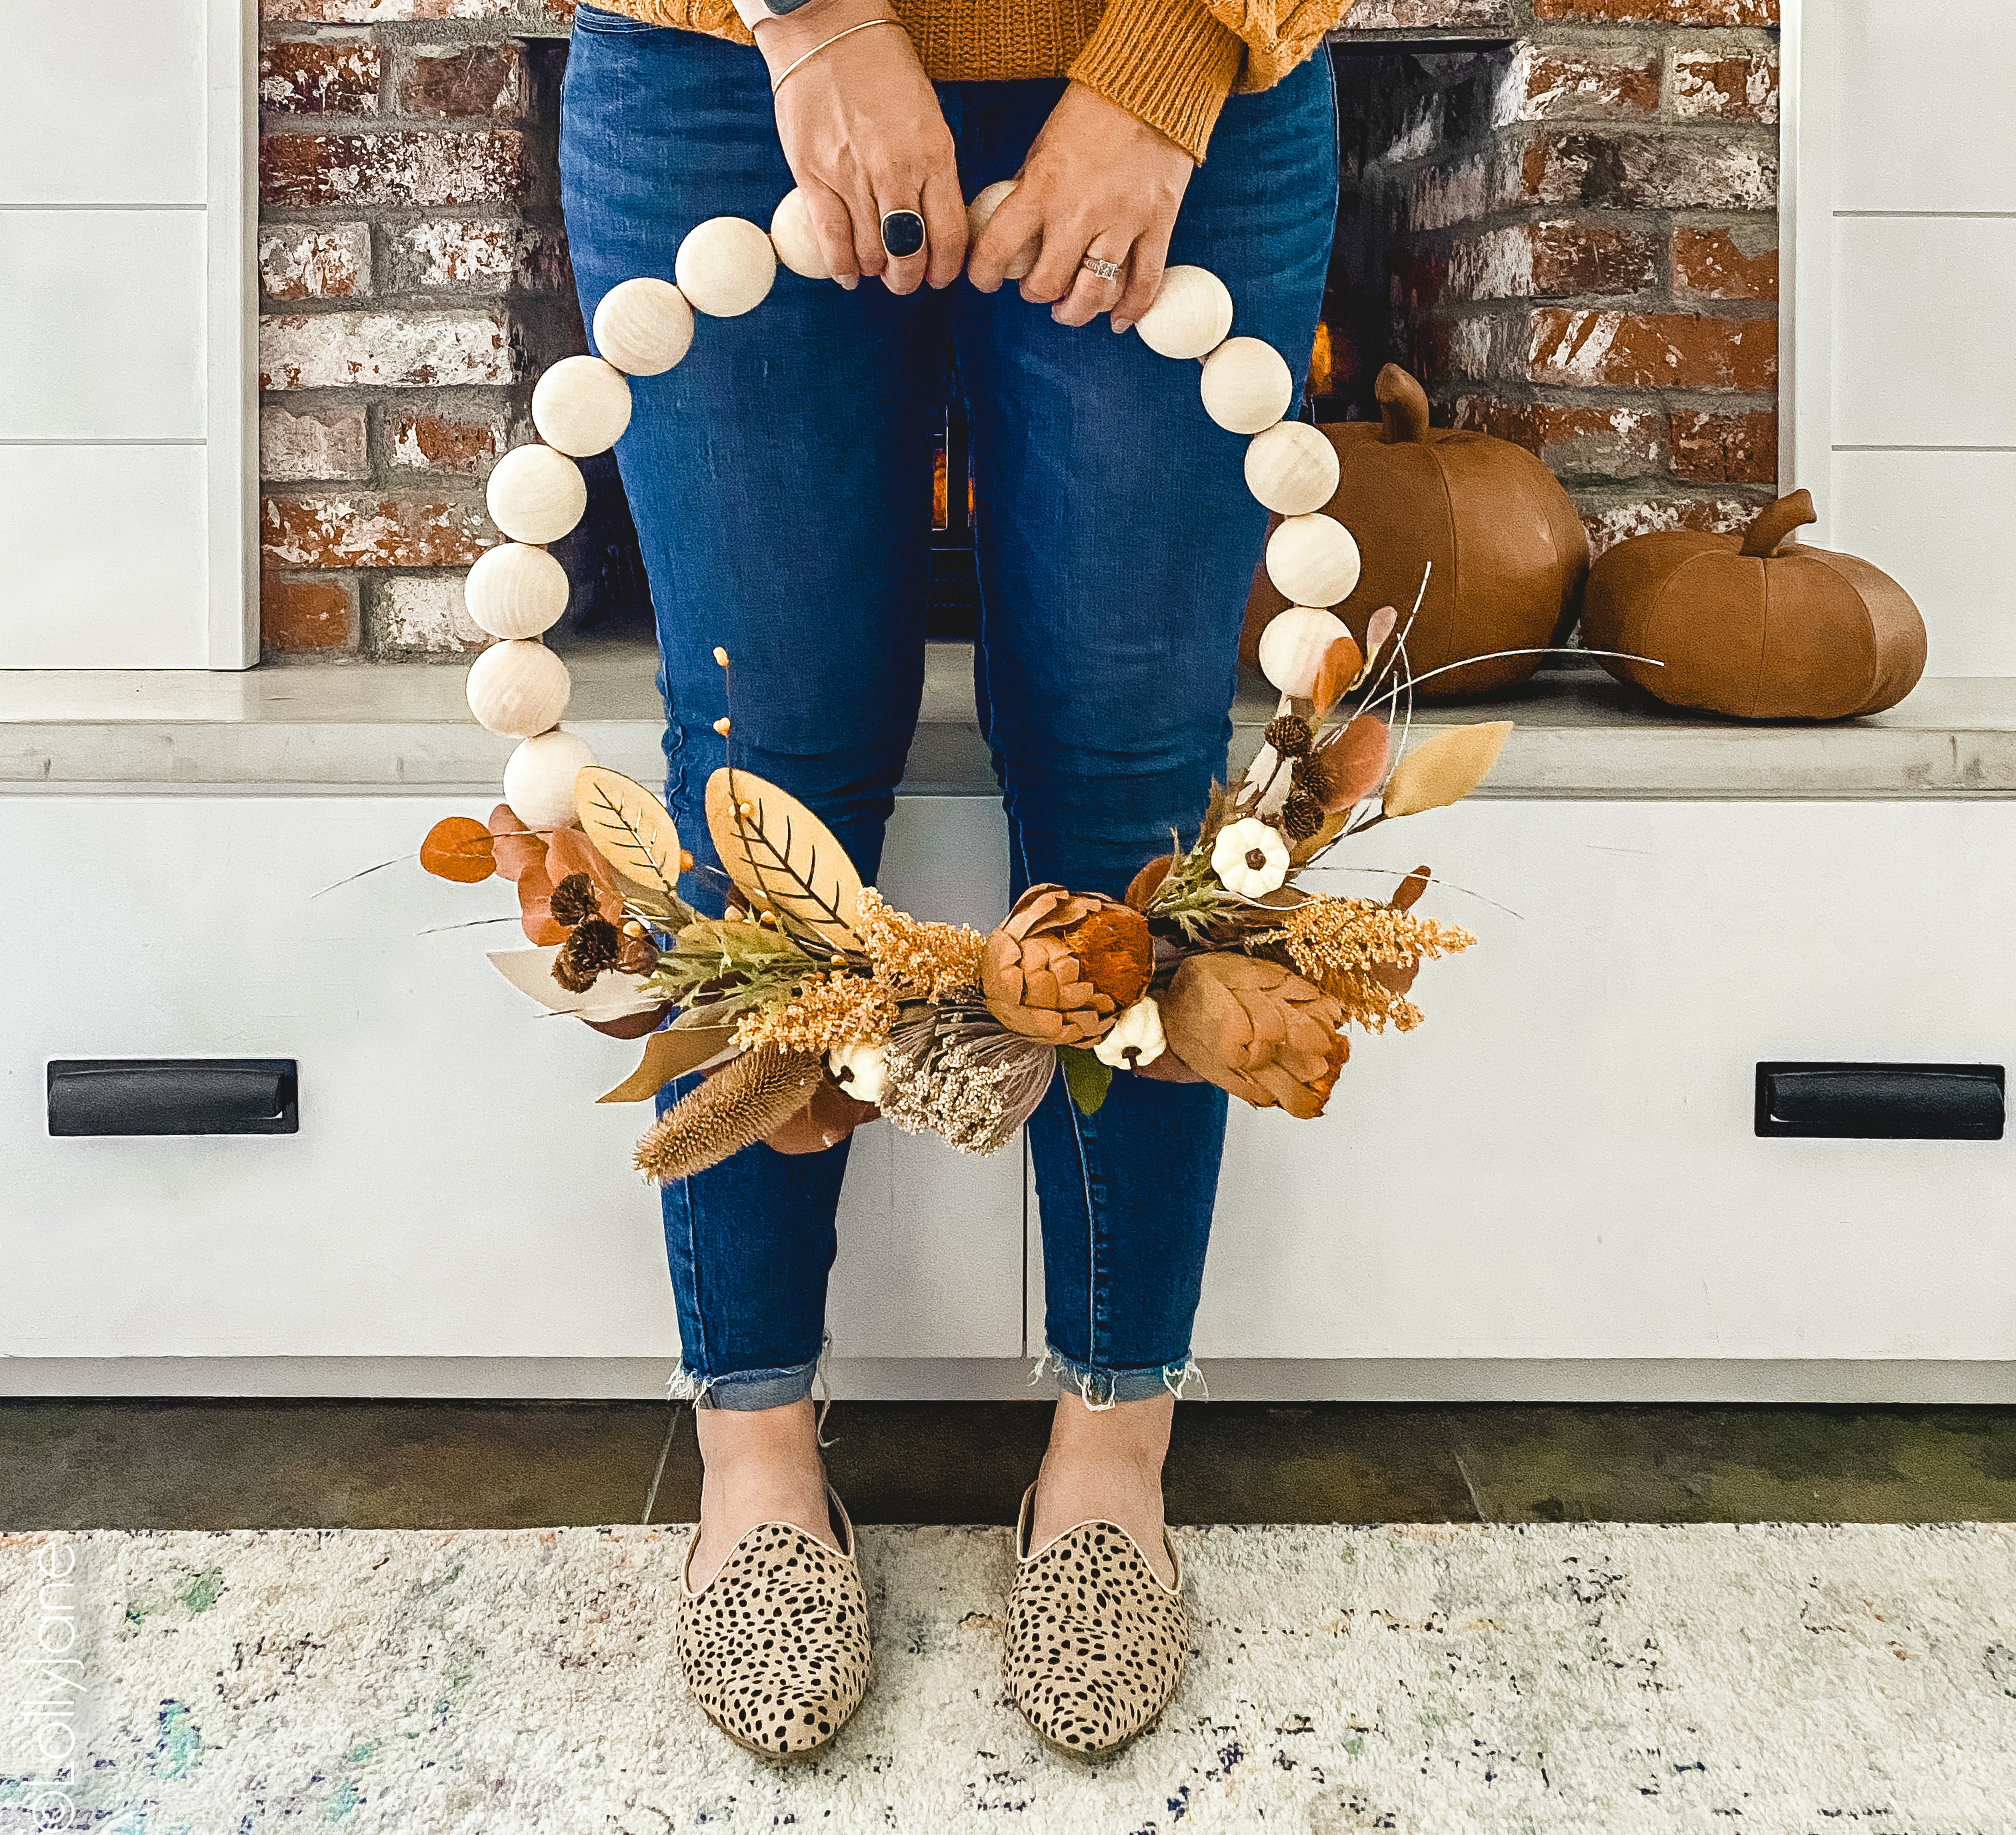 DIY Fall Split Bead Wreath, SO easy to make and super cute for ANY holiday-- just swap out the colors and elements! #woodbead #woodbeads #splitwoodbead #splitbead #beadwreath #diywreath #wreaths #fallwreath #handmade